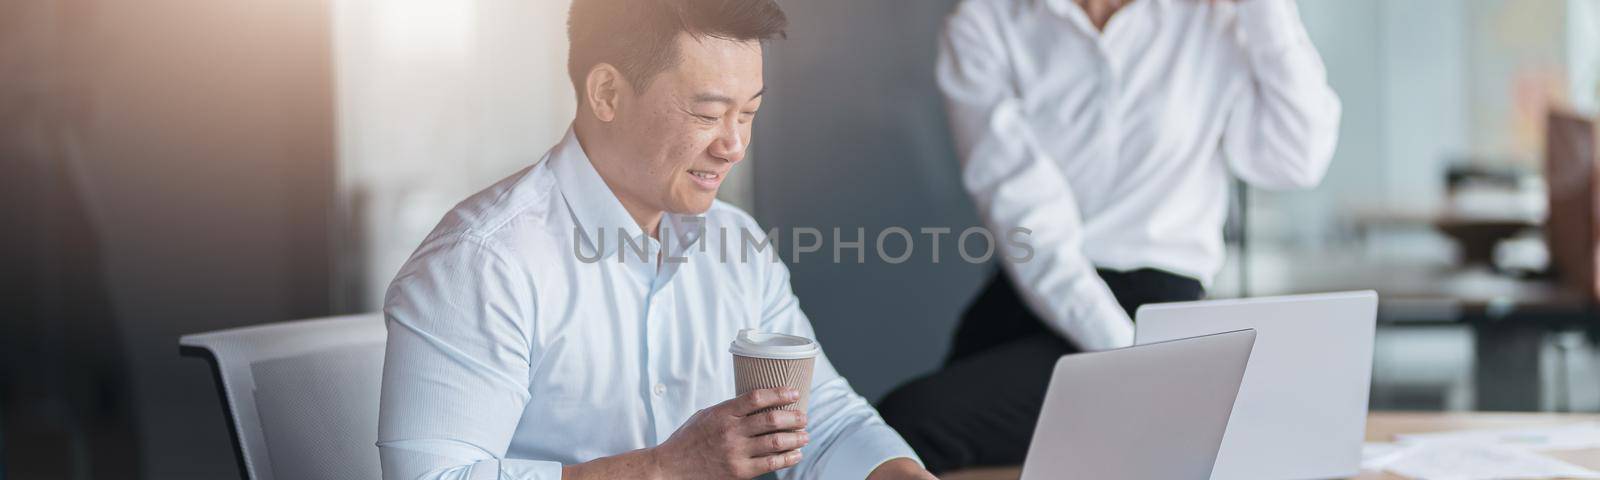 Asian businessman drink coffee and working on laptop with colleague talking on phone in background